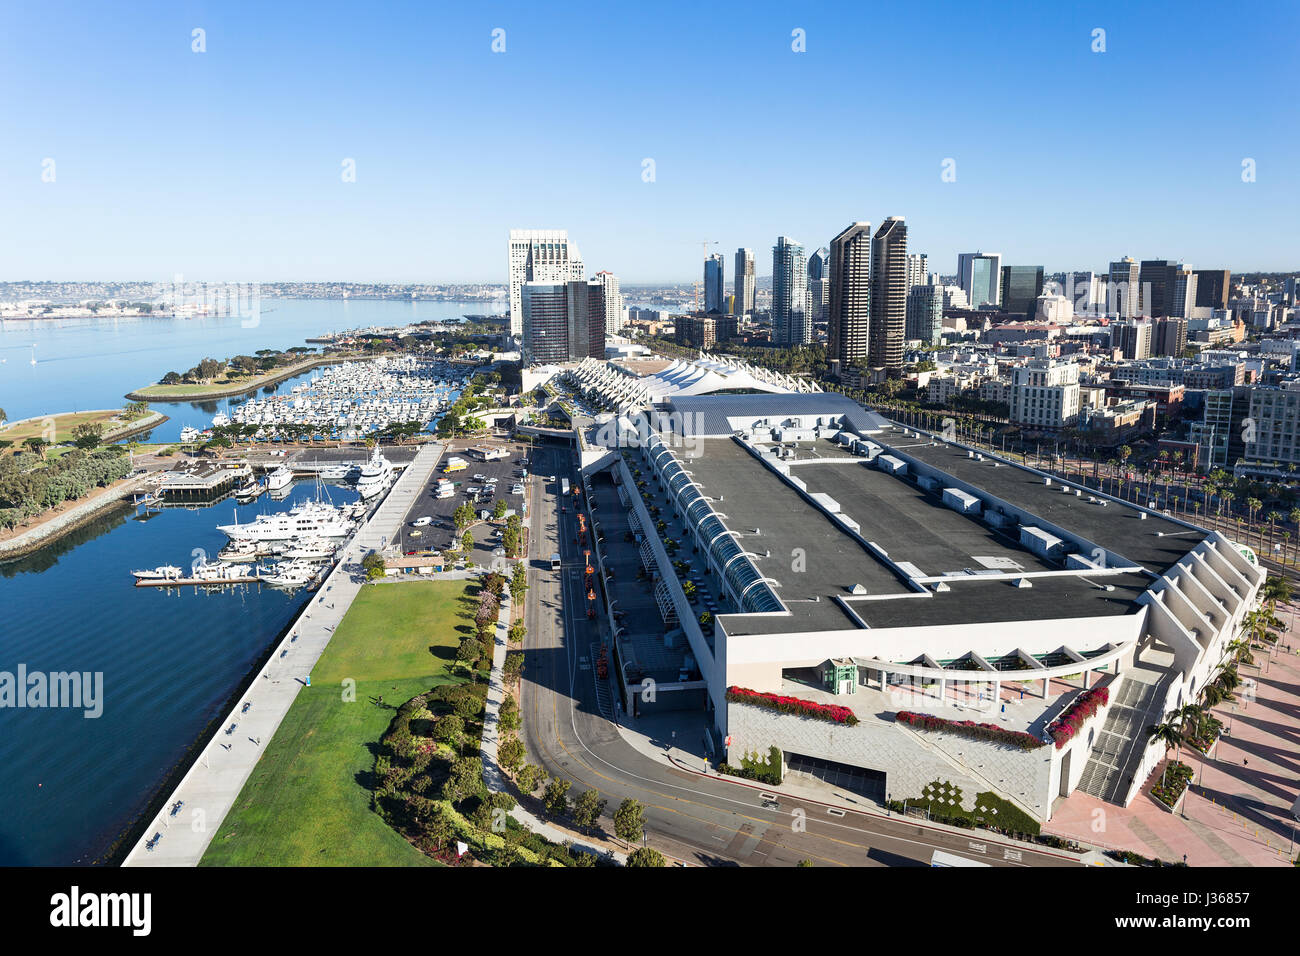 Downtown San Diego skyline and city view in California Stock Photo